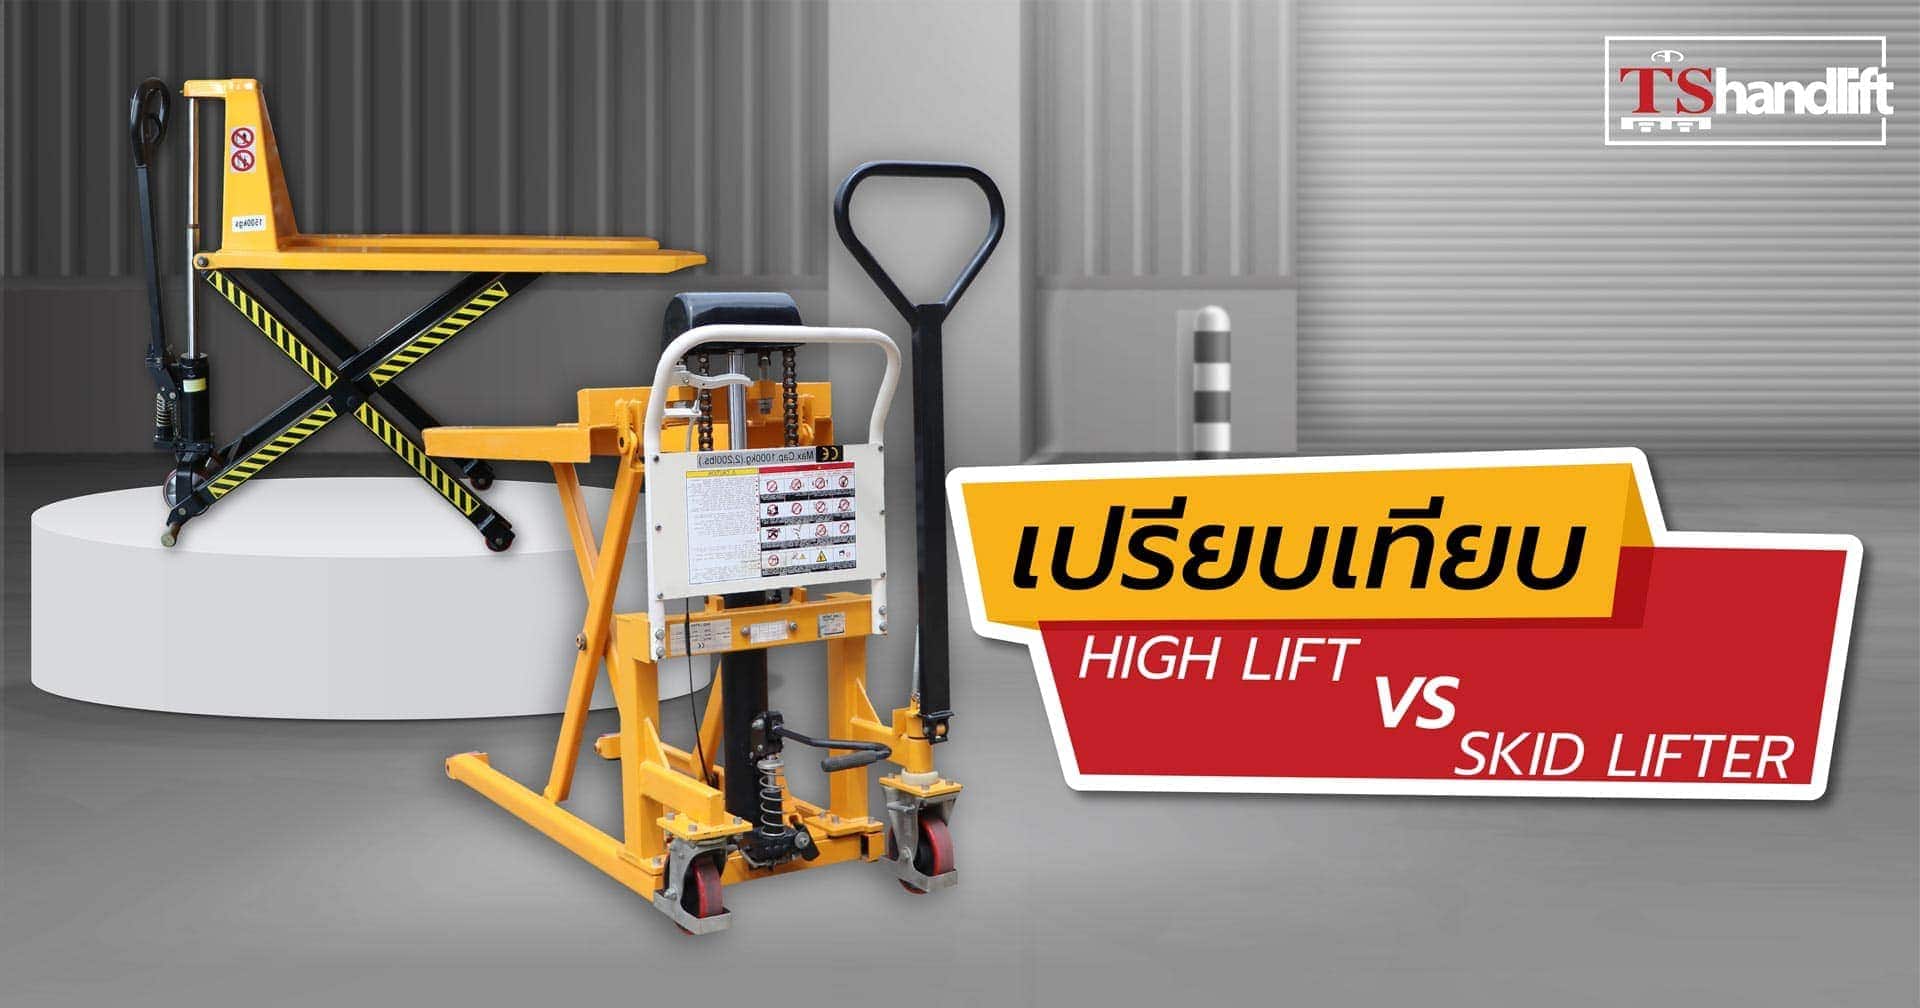 SECTION 03 High Lift Pallet Truck VS Skid Lifter compare